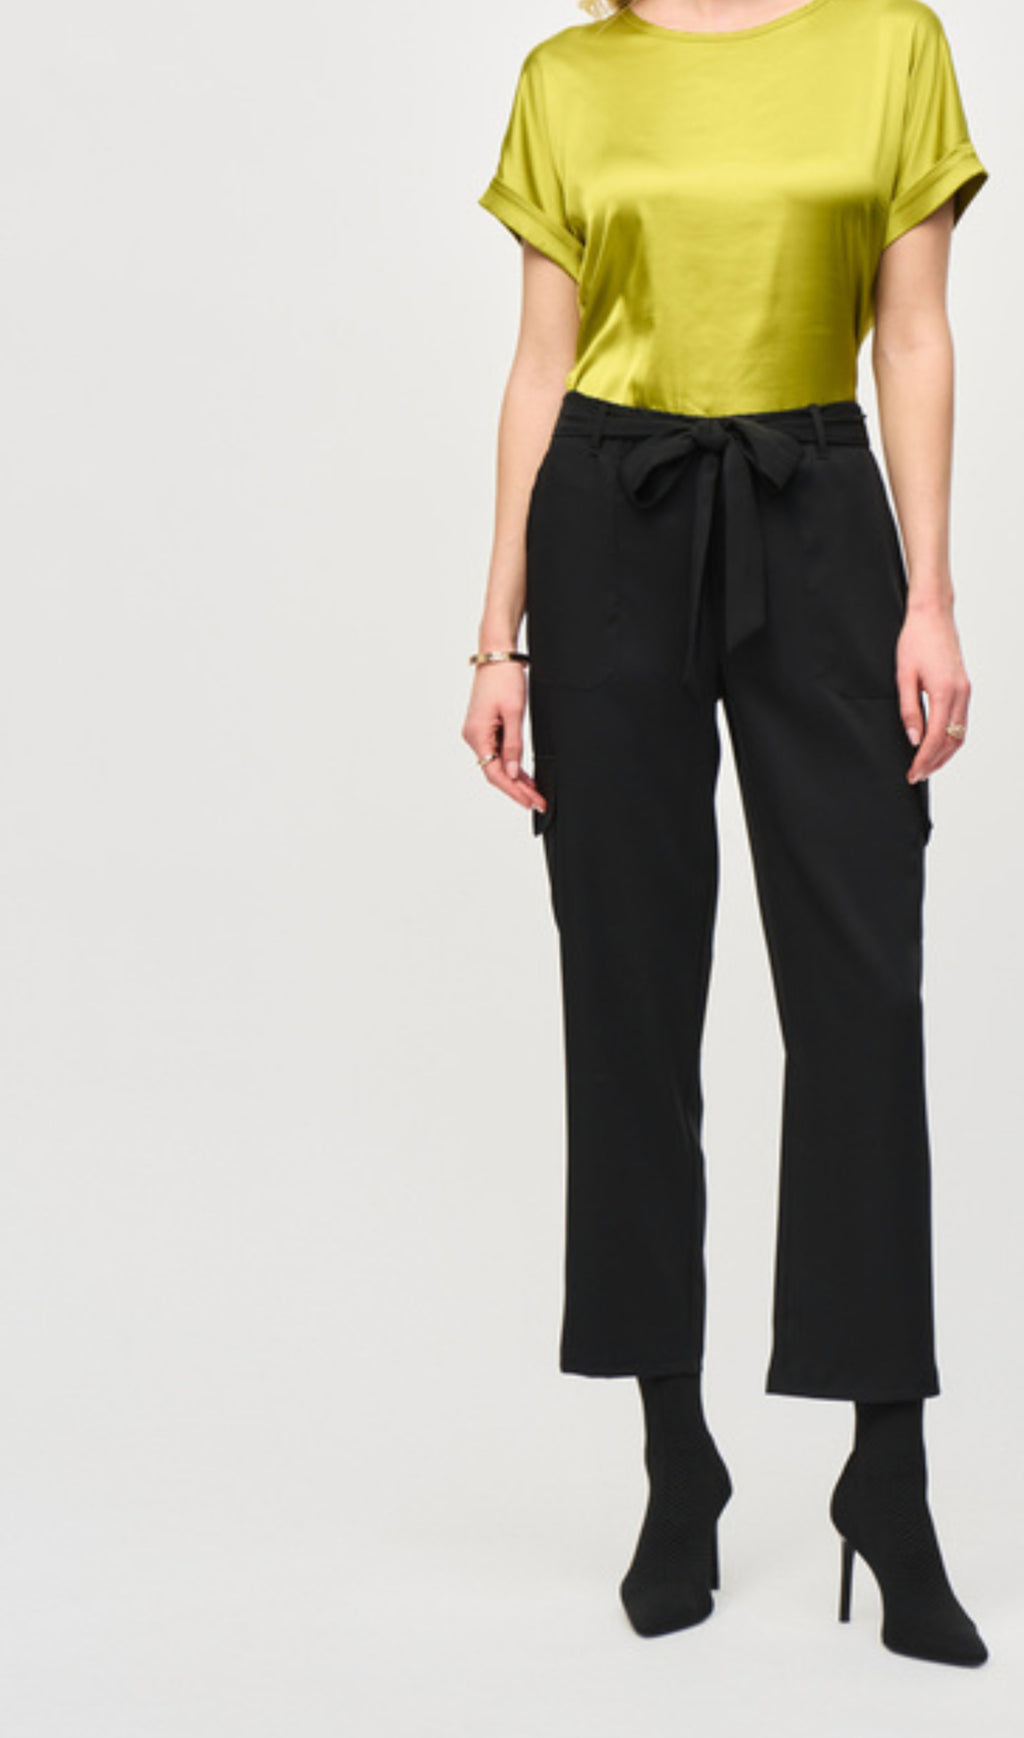 Knotted Front Pant